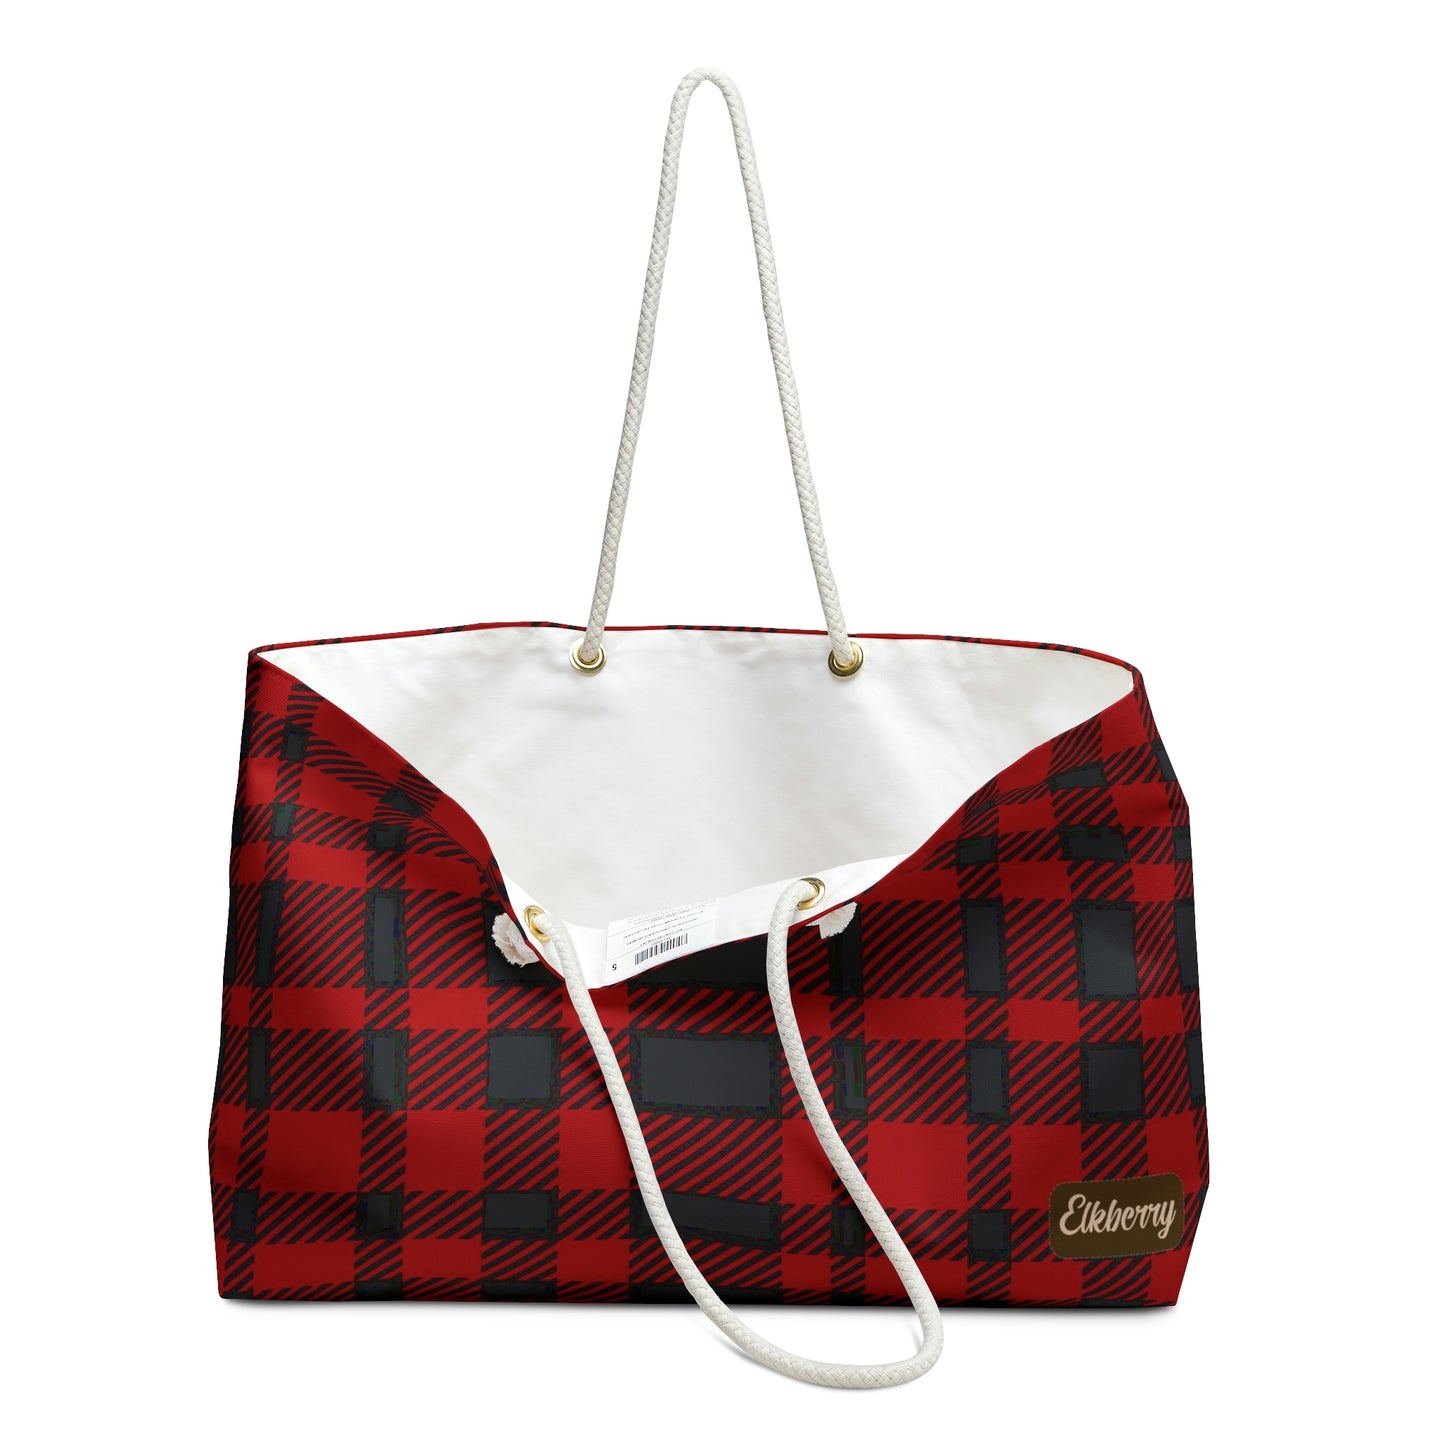 Weekender Tote Bag - Red Buffalo Check, Red Plaid